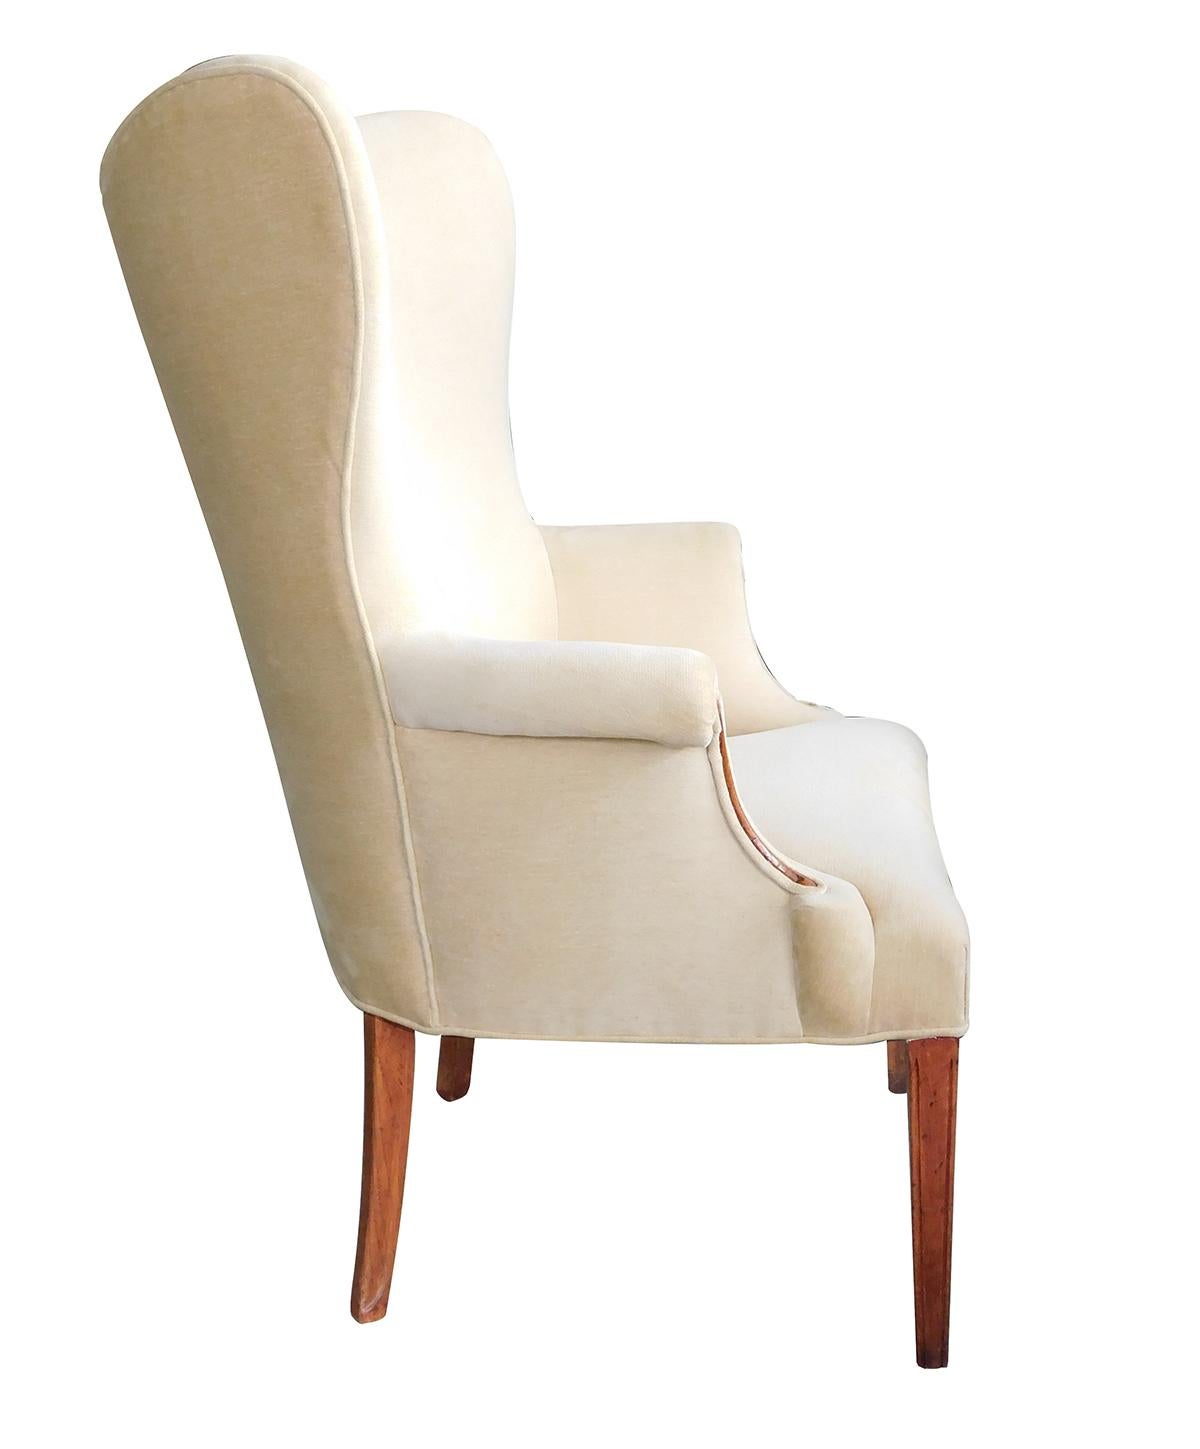 wing back arm chairs for sale